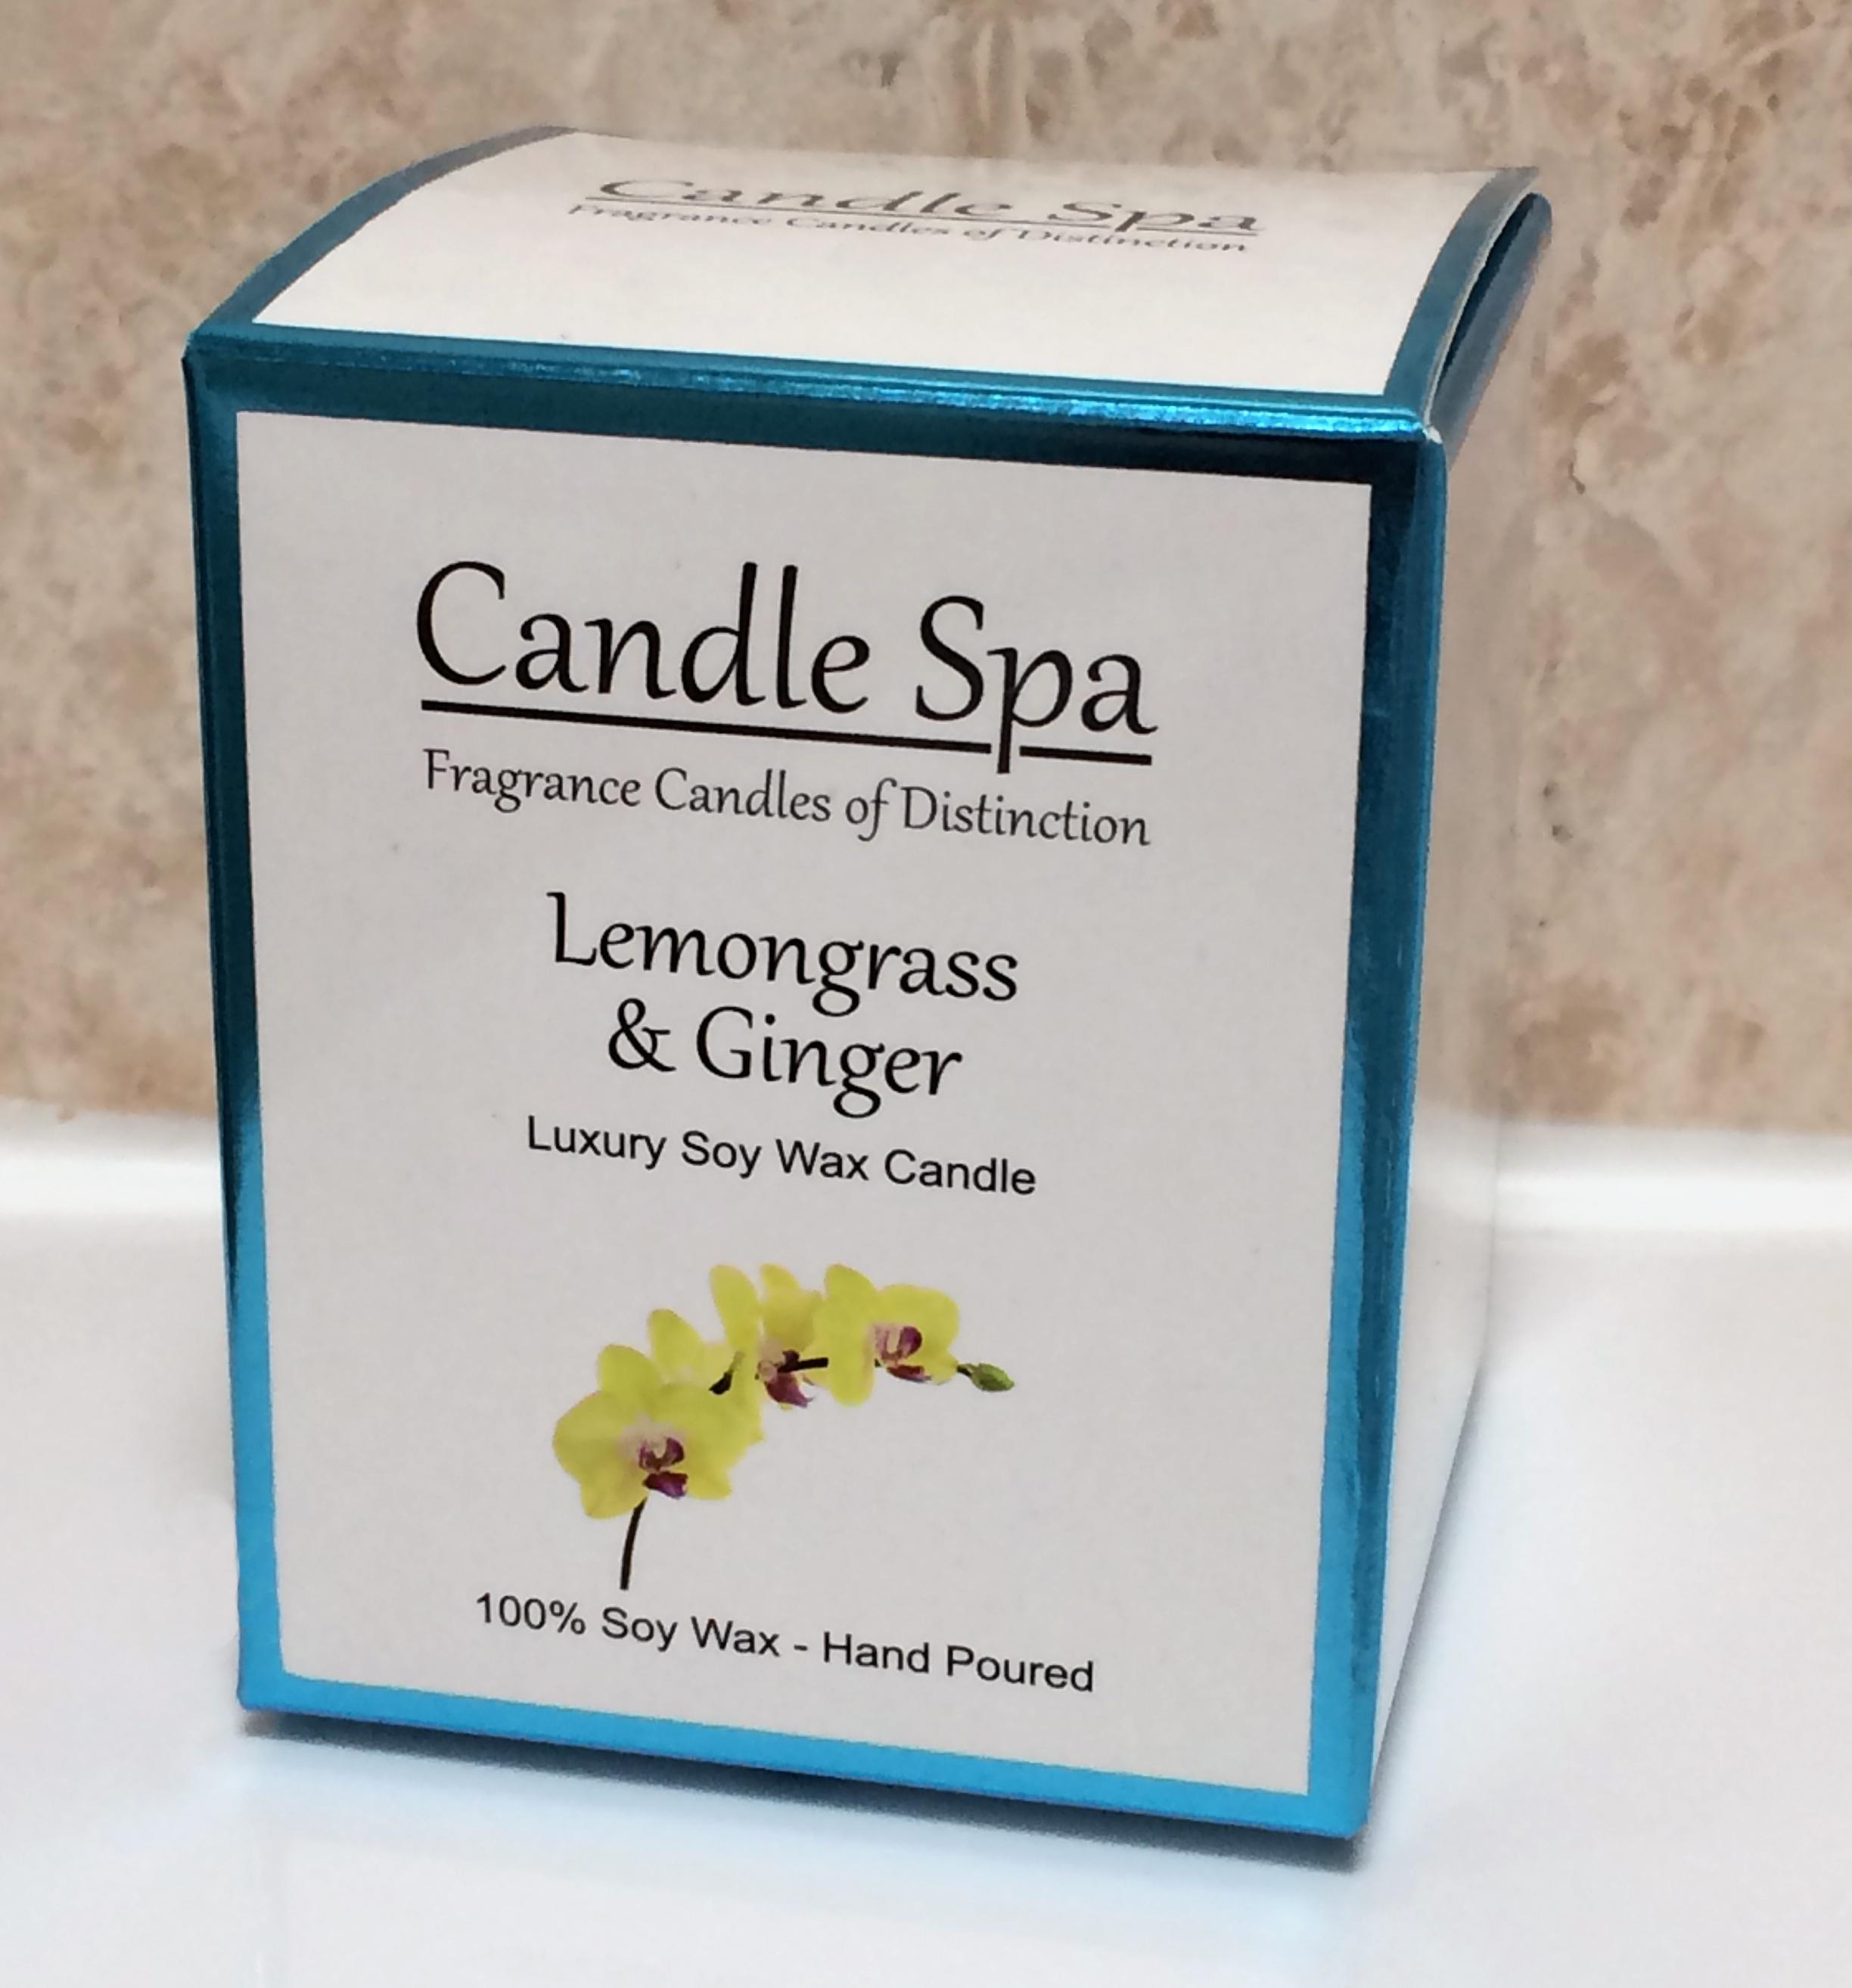 Candle Spa Luxury Candle in 20cl Box - Lemongrass & Ginger